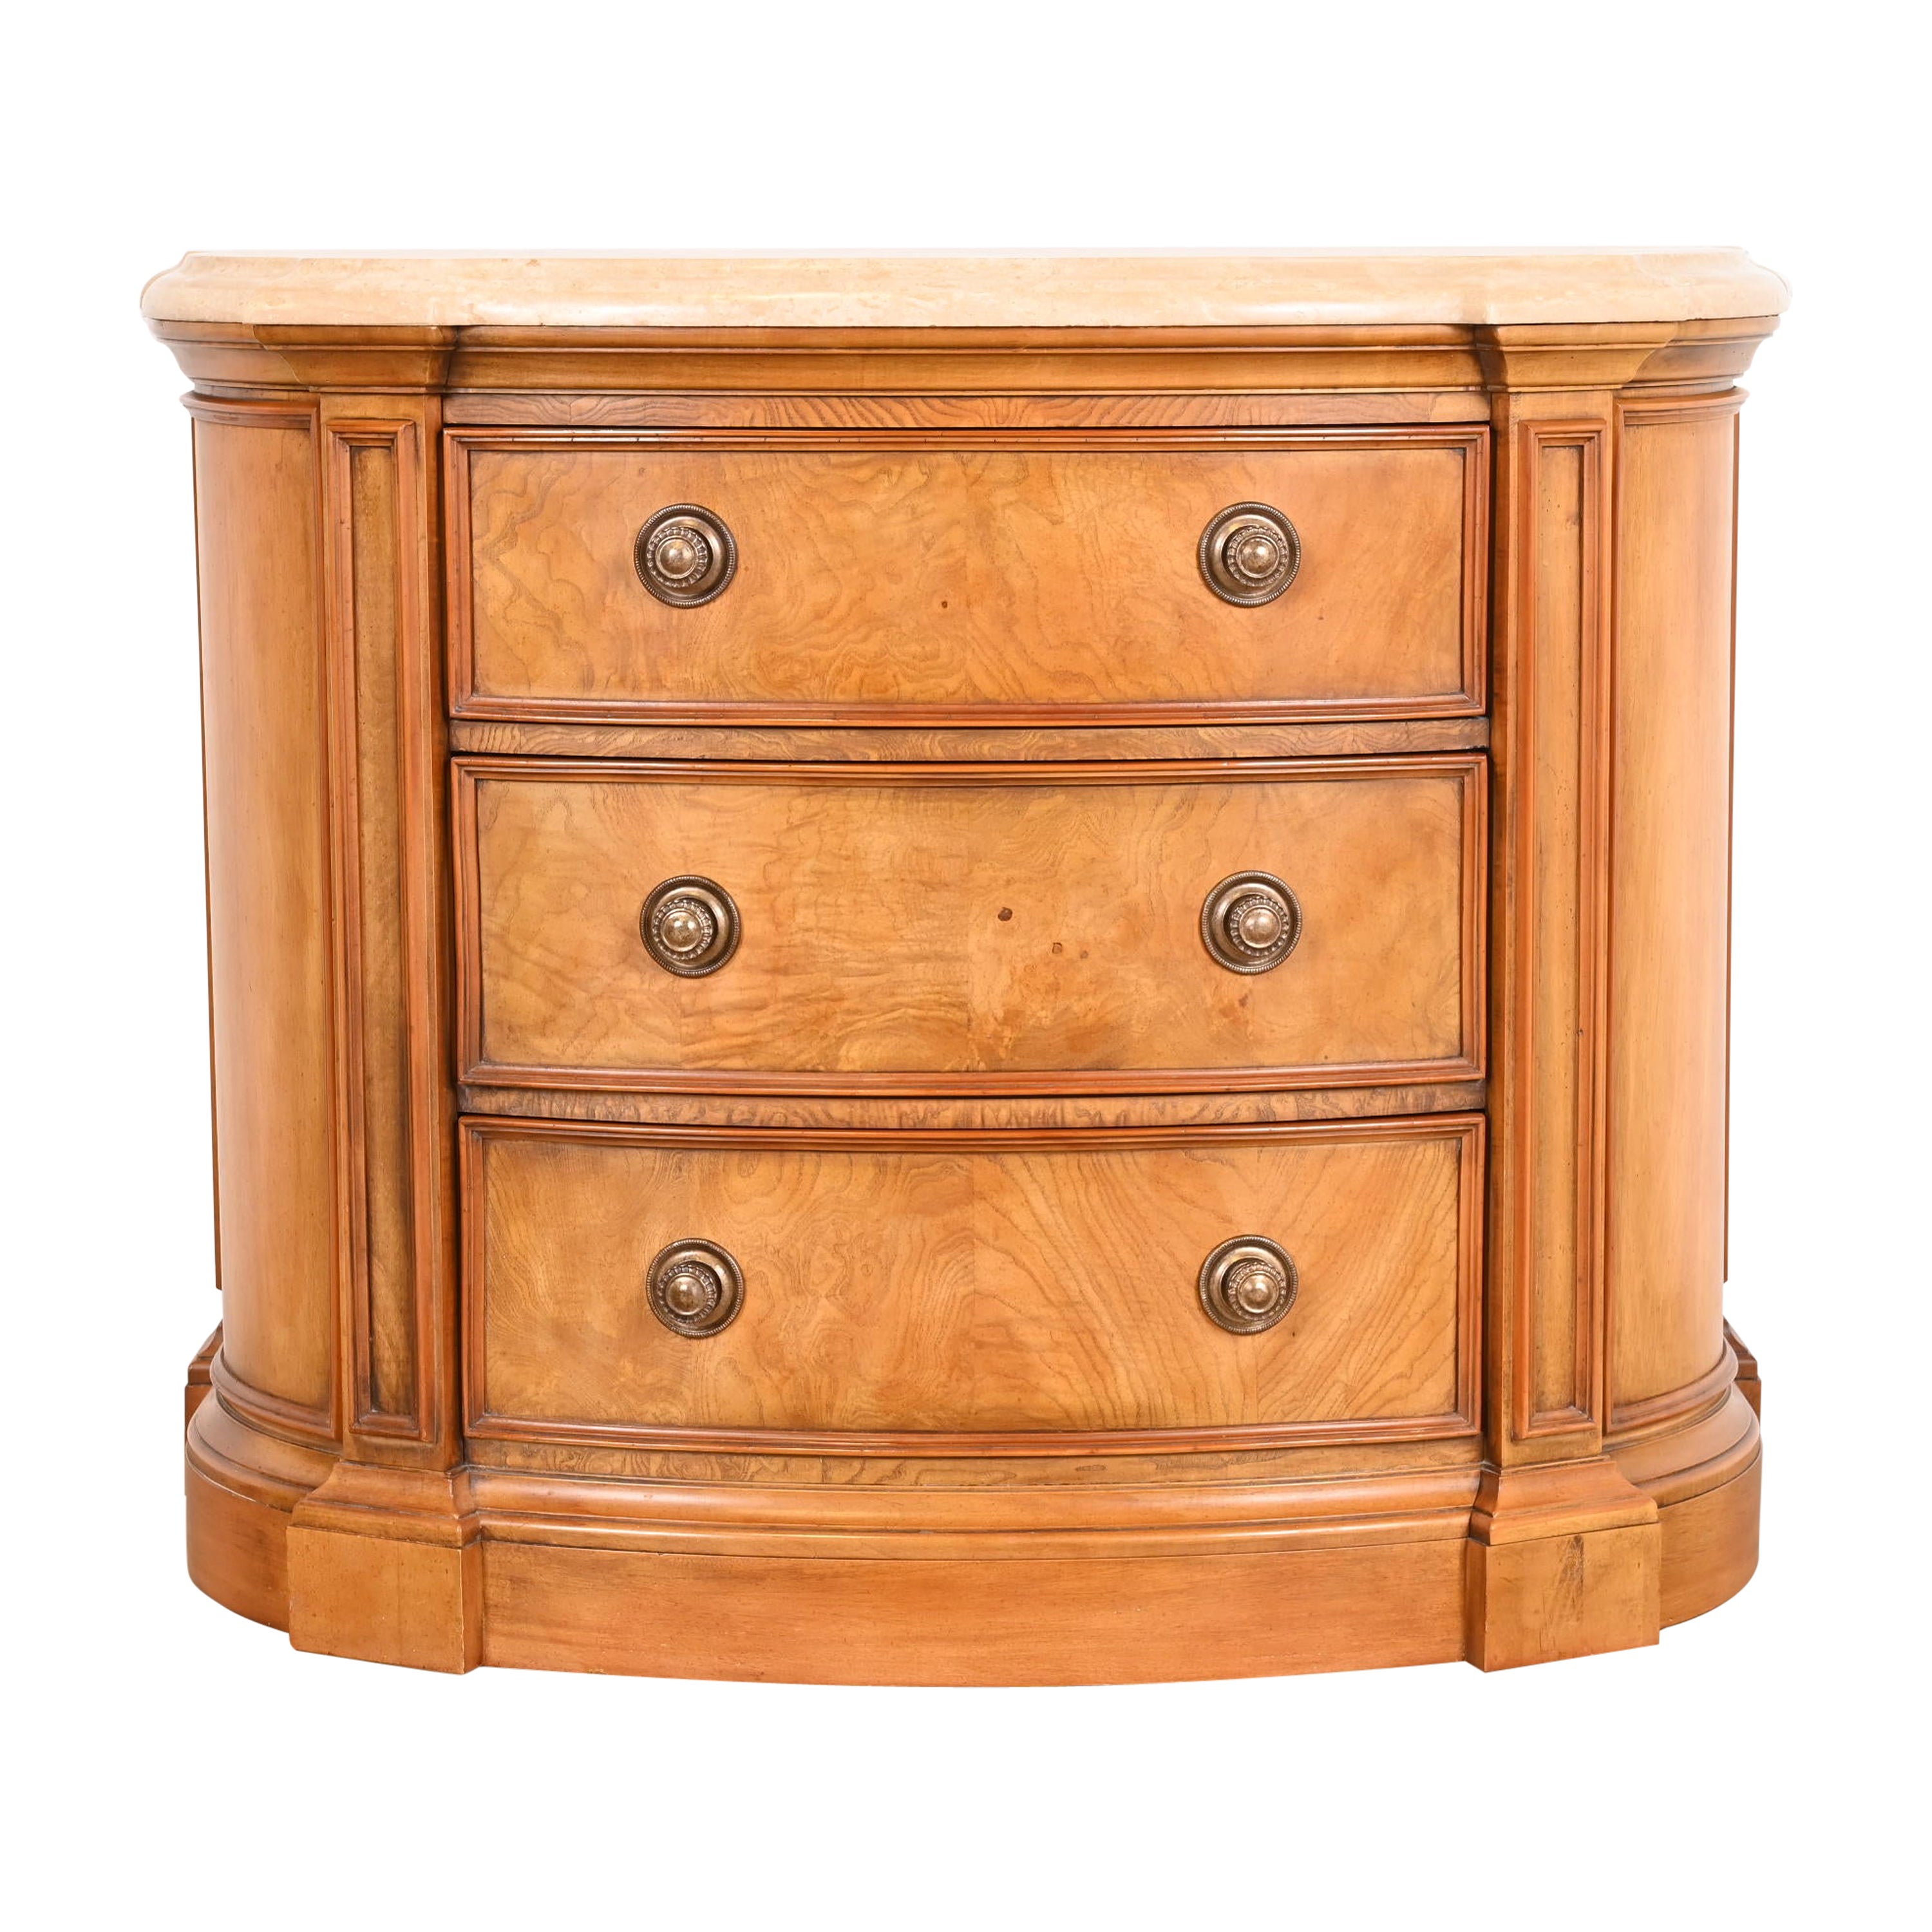 Henredon Burl Wood Regency Marble Top Demilune Commode or Chest of Drawers For Sale